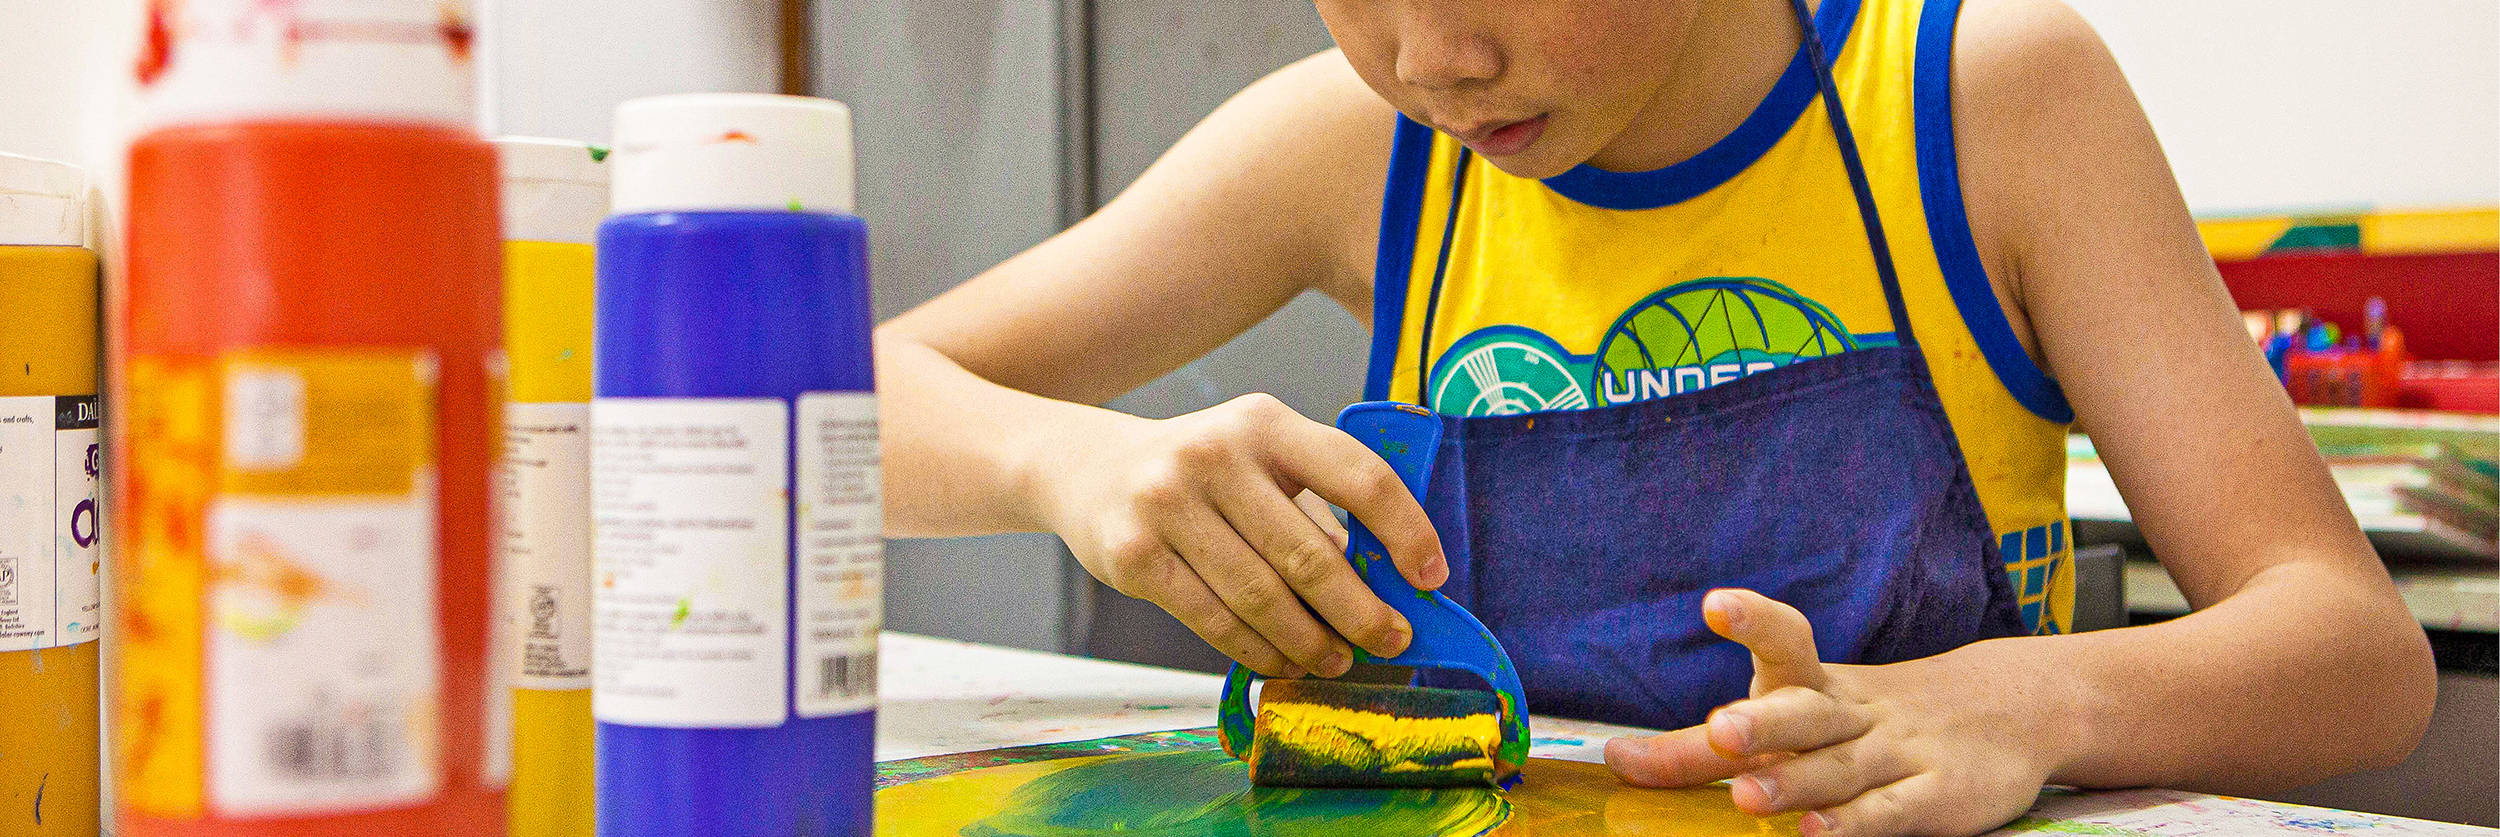 his banner features a young student using a roller brush to apply green and blue paint onto a canvas.